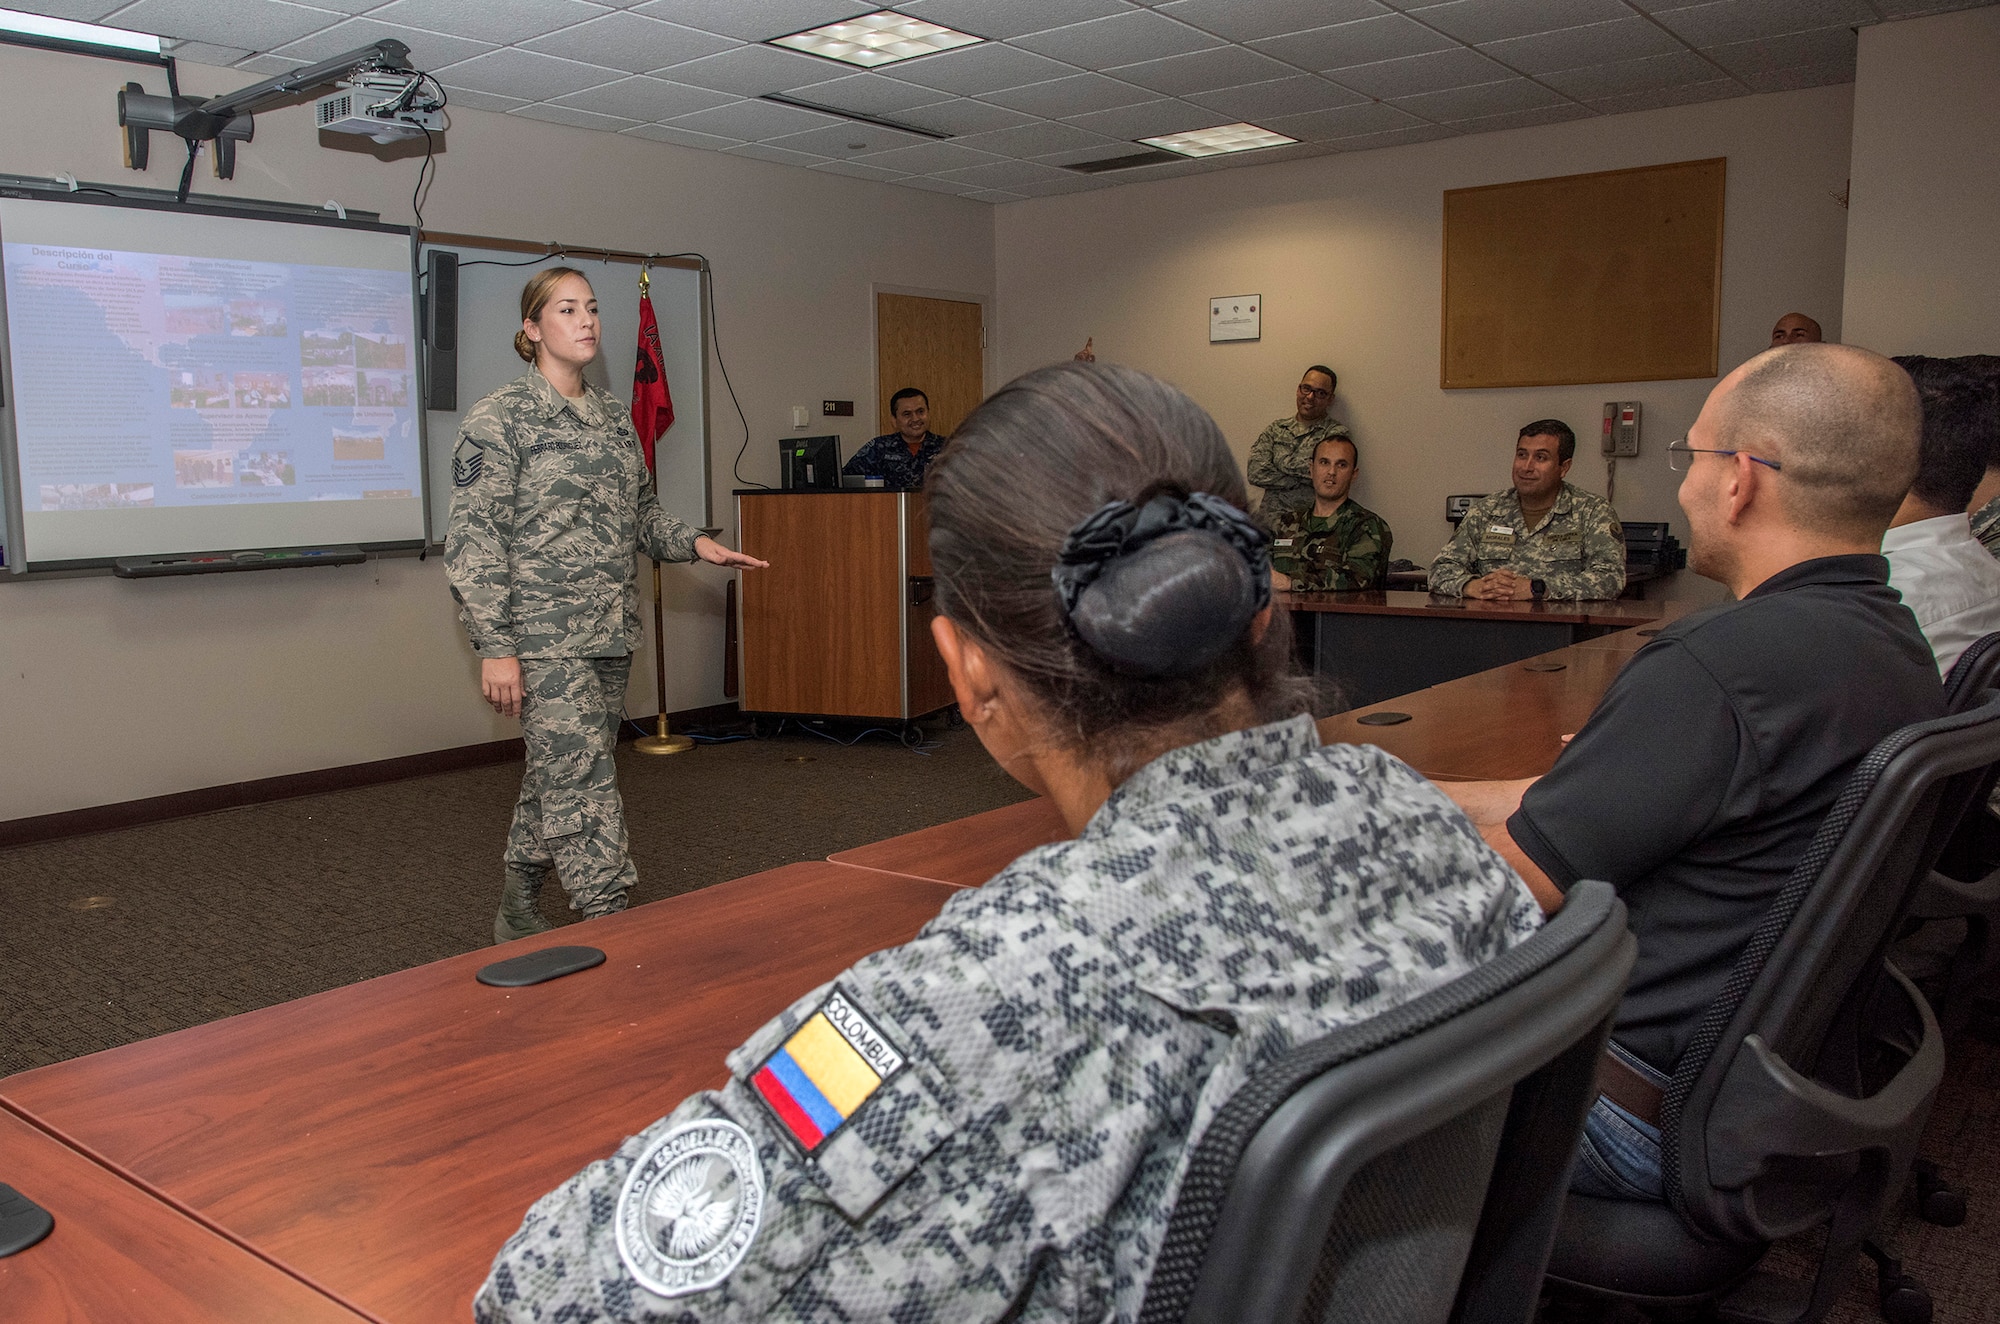 Master Sgt. Amy Ferraro-Rodriguez, 837th Training Squadron instructor, provides professional military education training to international and civil service students during an International Airman Leadership School course Oct. 13, 2017 at Joint Base San Antonio-Lackland Inter-American Air Forces Academy. The IALS teaches the same course imparted to military personnel in the grade of senior airman and staff sergeant or E-5 equivalent in the United States Air Force Total Force. This course is the foundational step in the professional development as it prepares individuals to assume greater leadership and responsibilities.